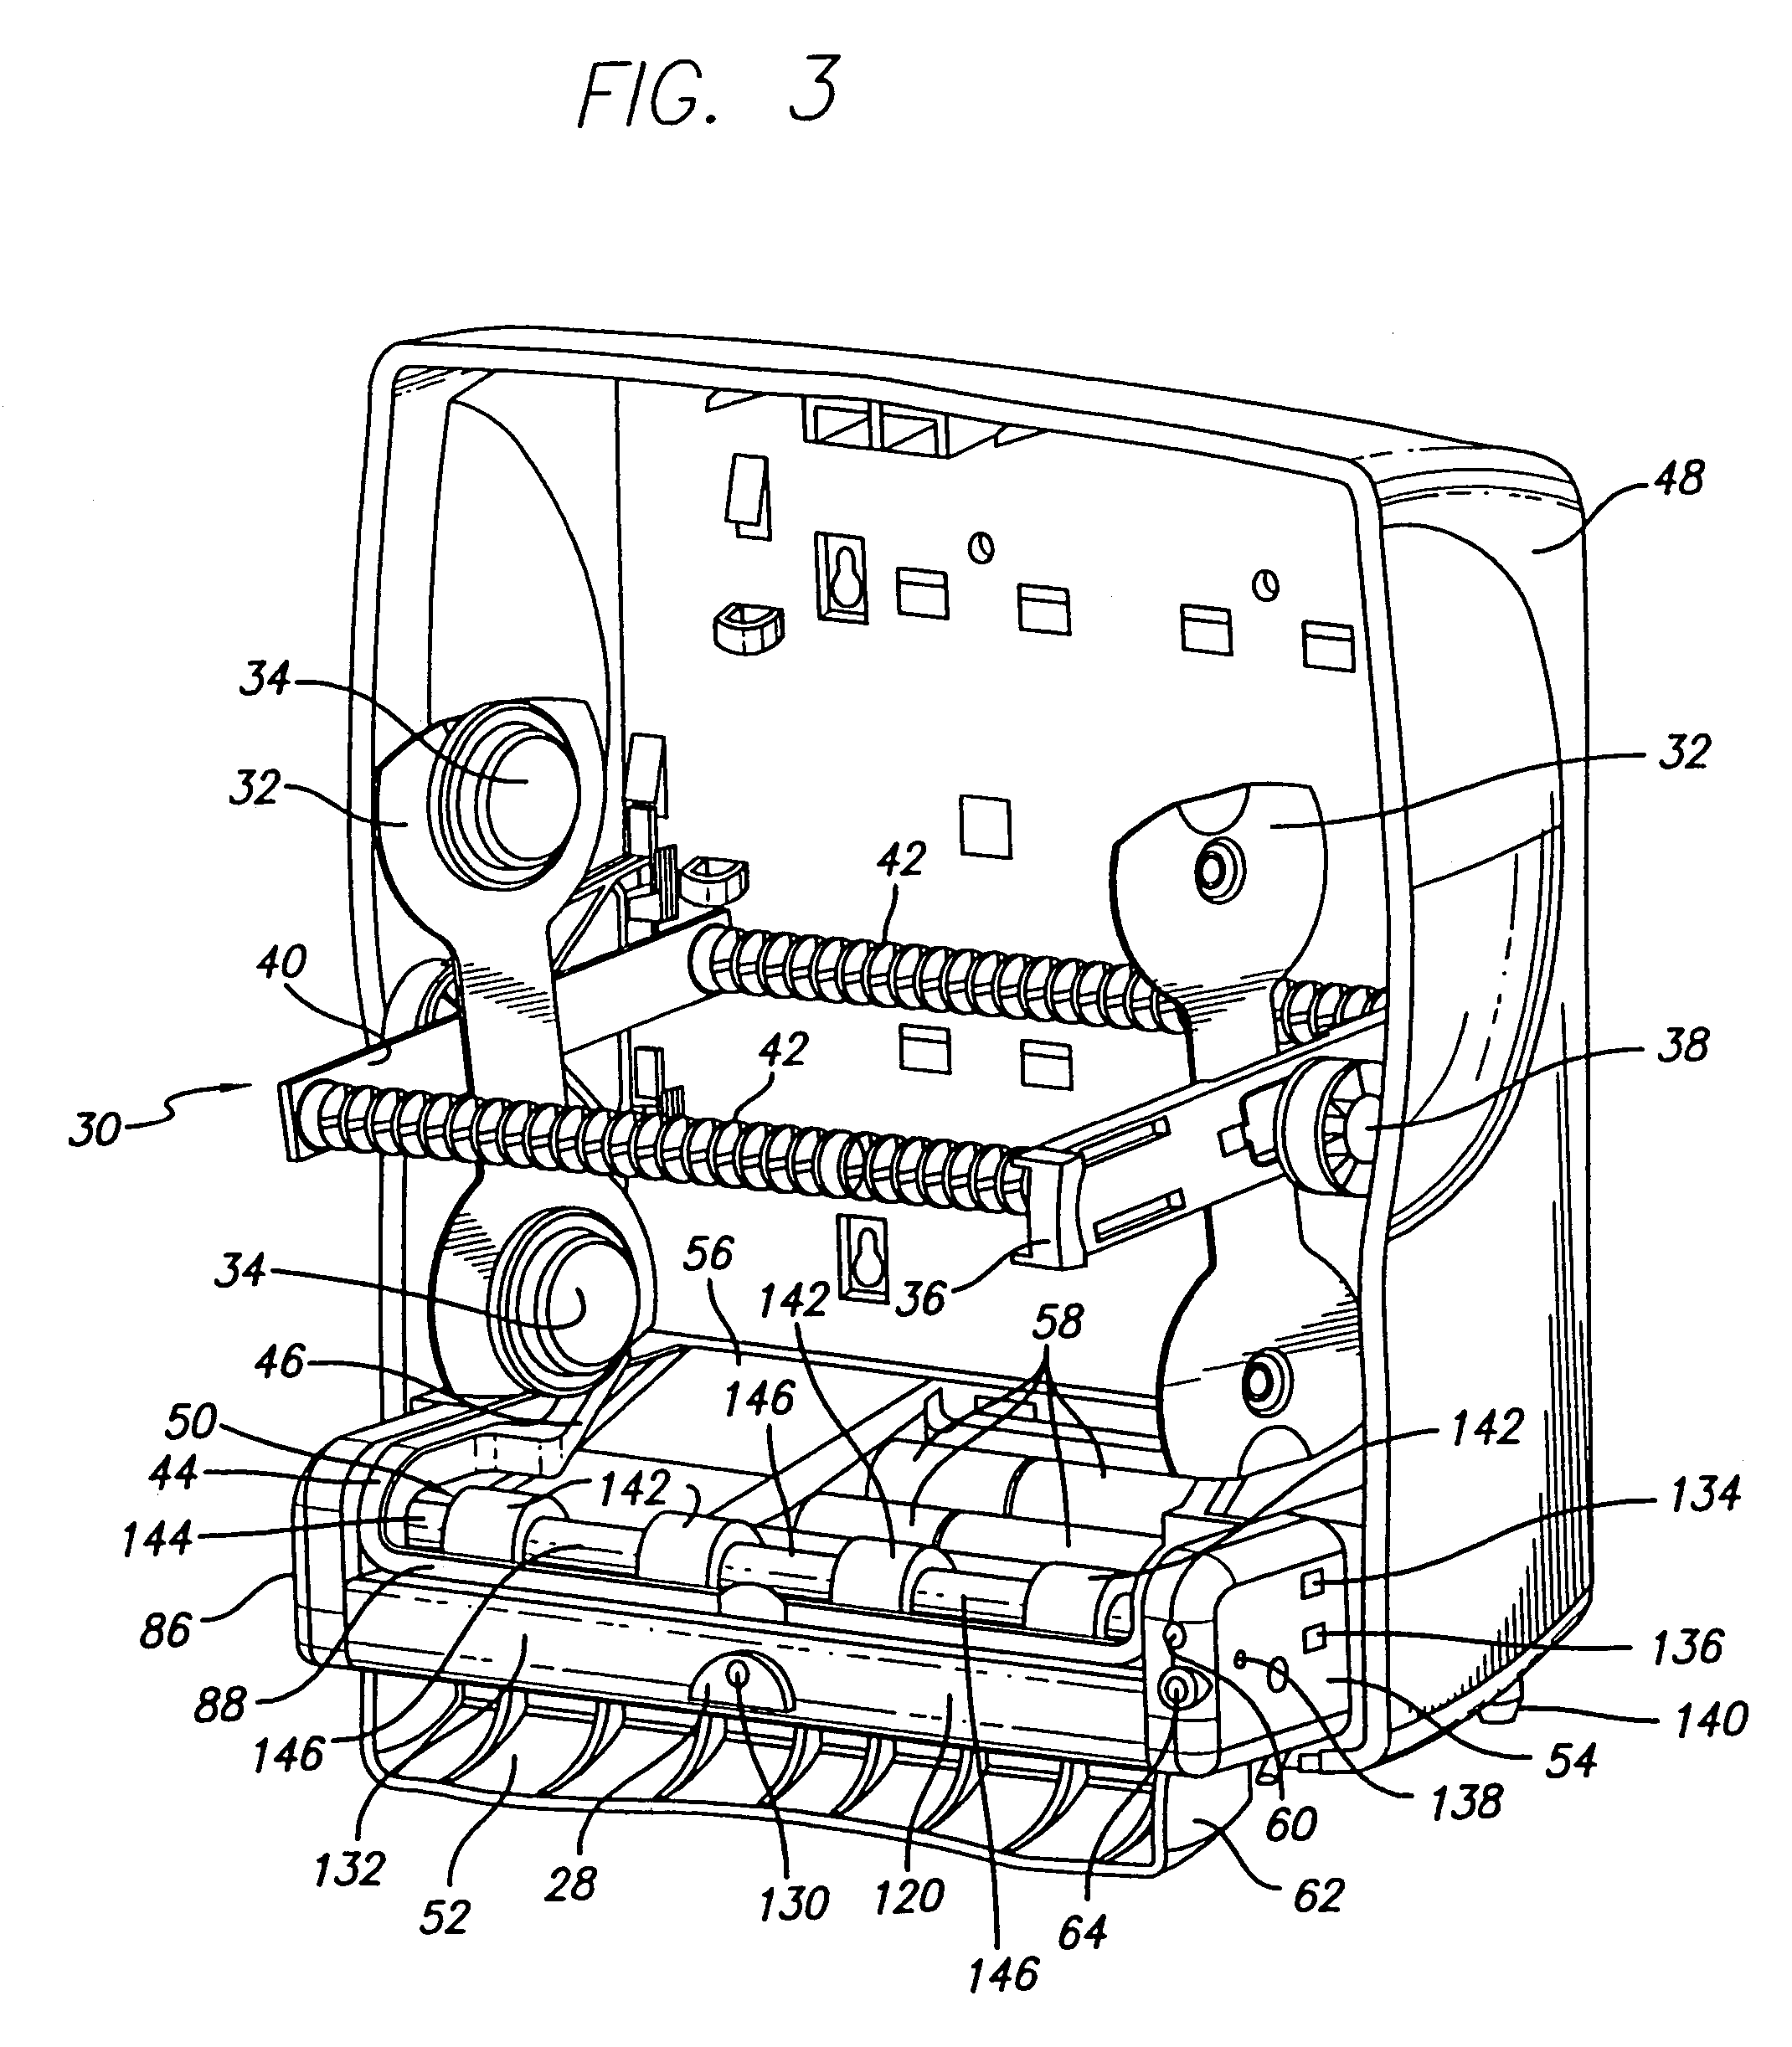 Static build-up control in dispensing system